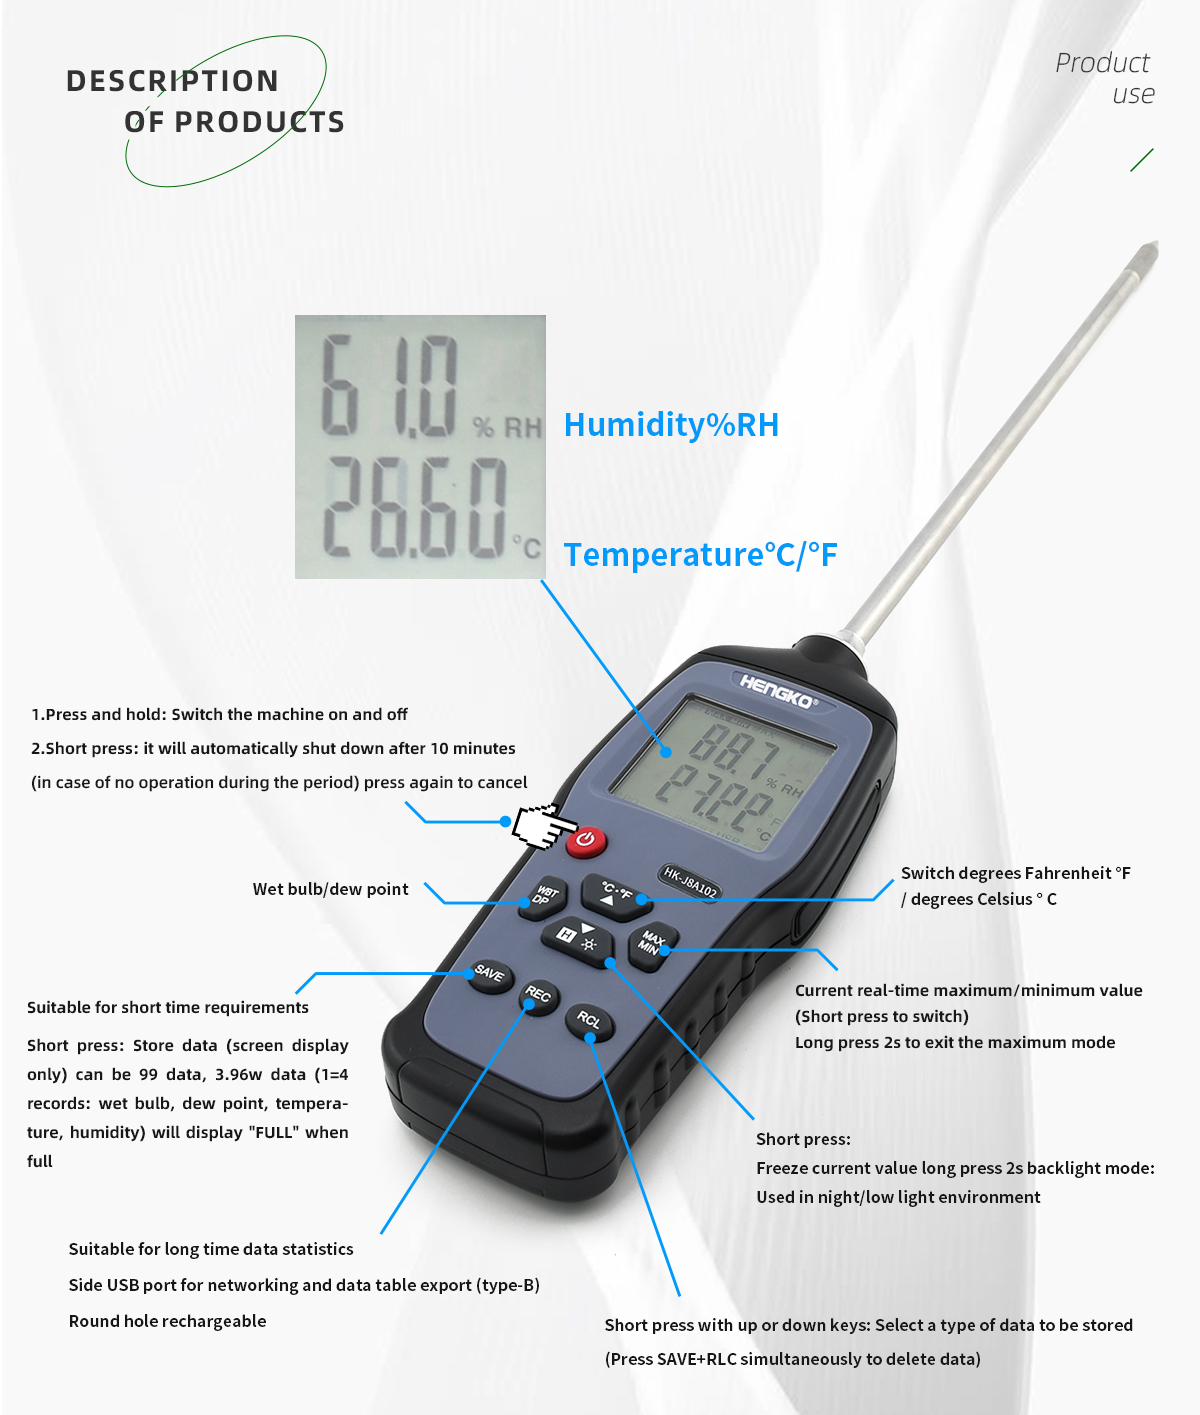 hg970handheld temperature and humidity meter instrution